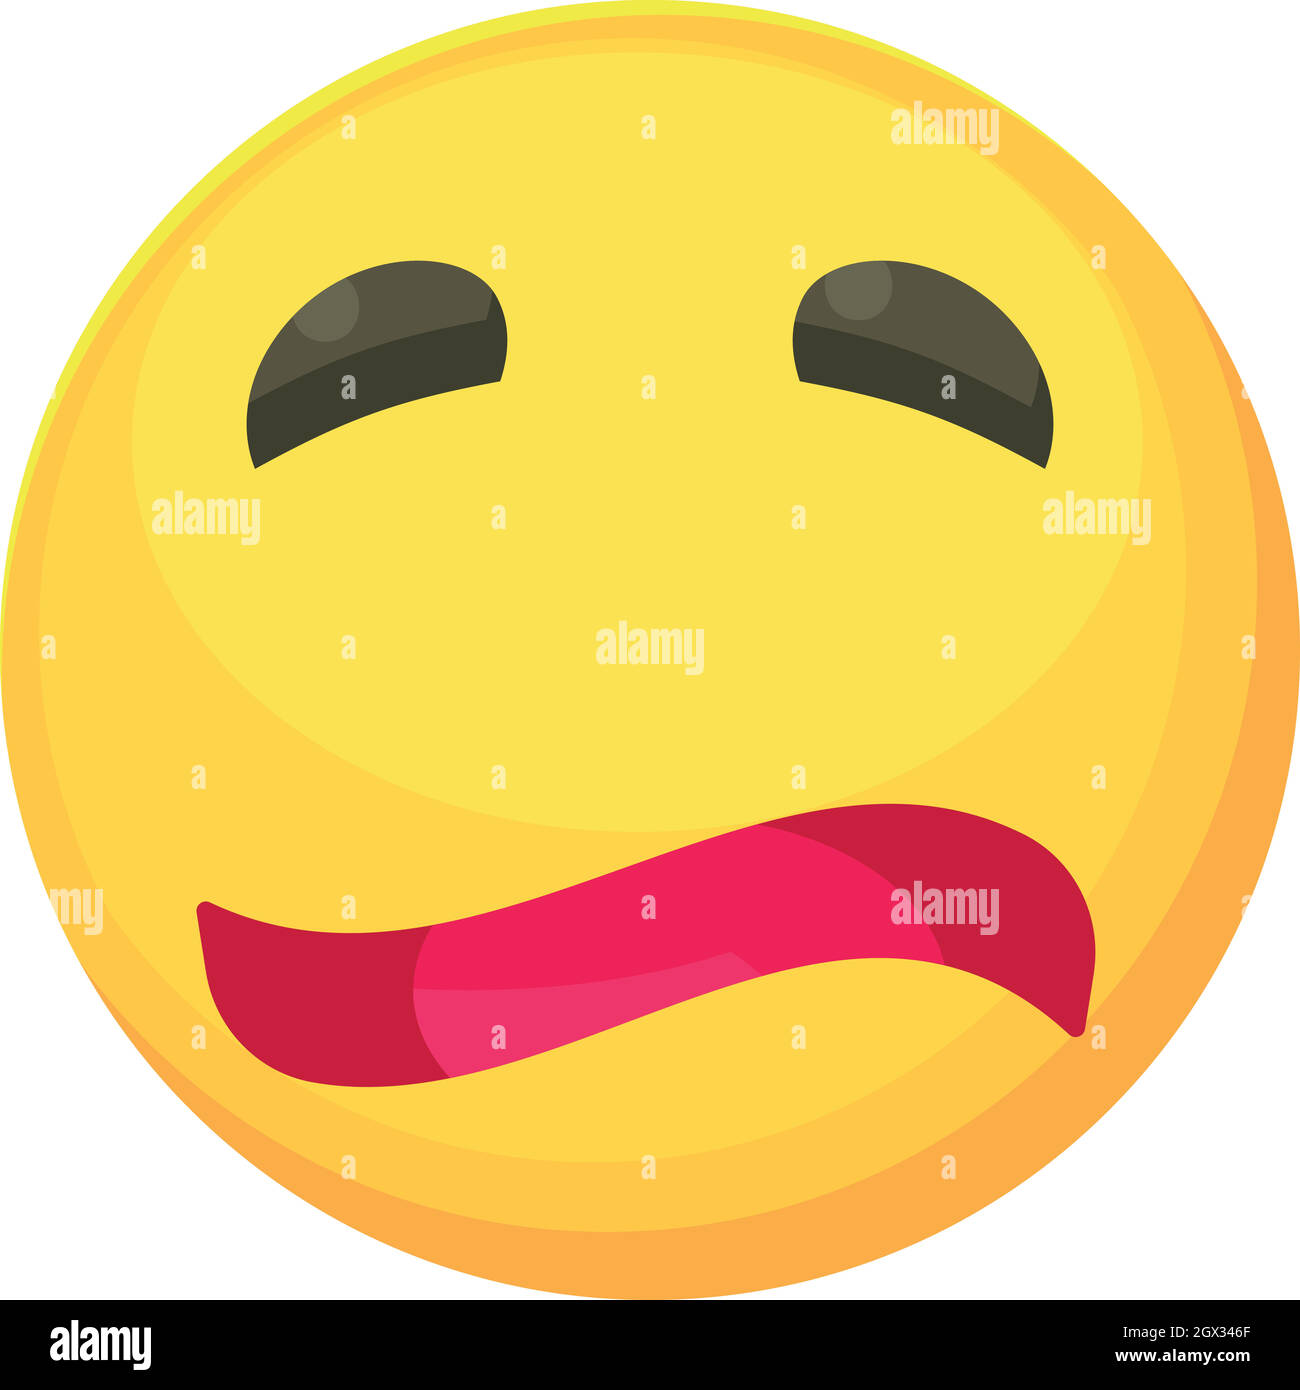 Painfully smiley icon, cartoon style Stock Vector